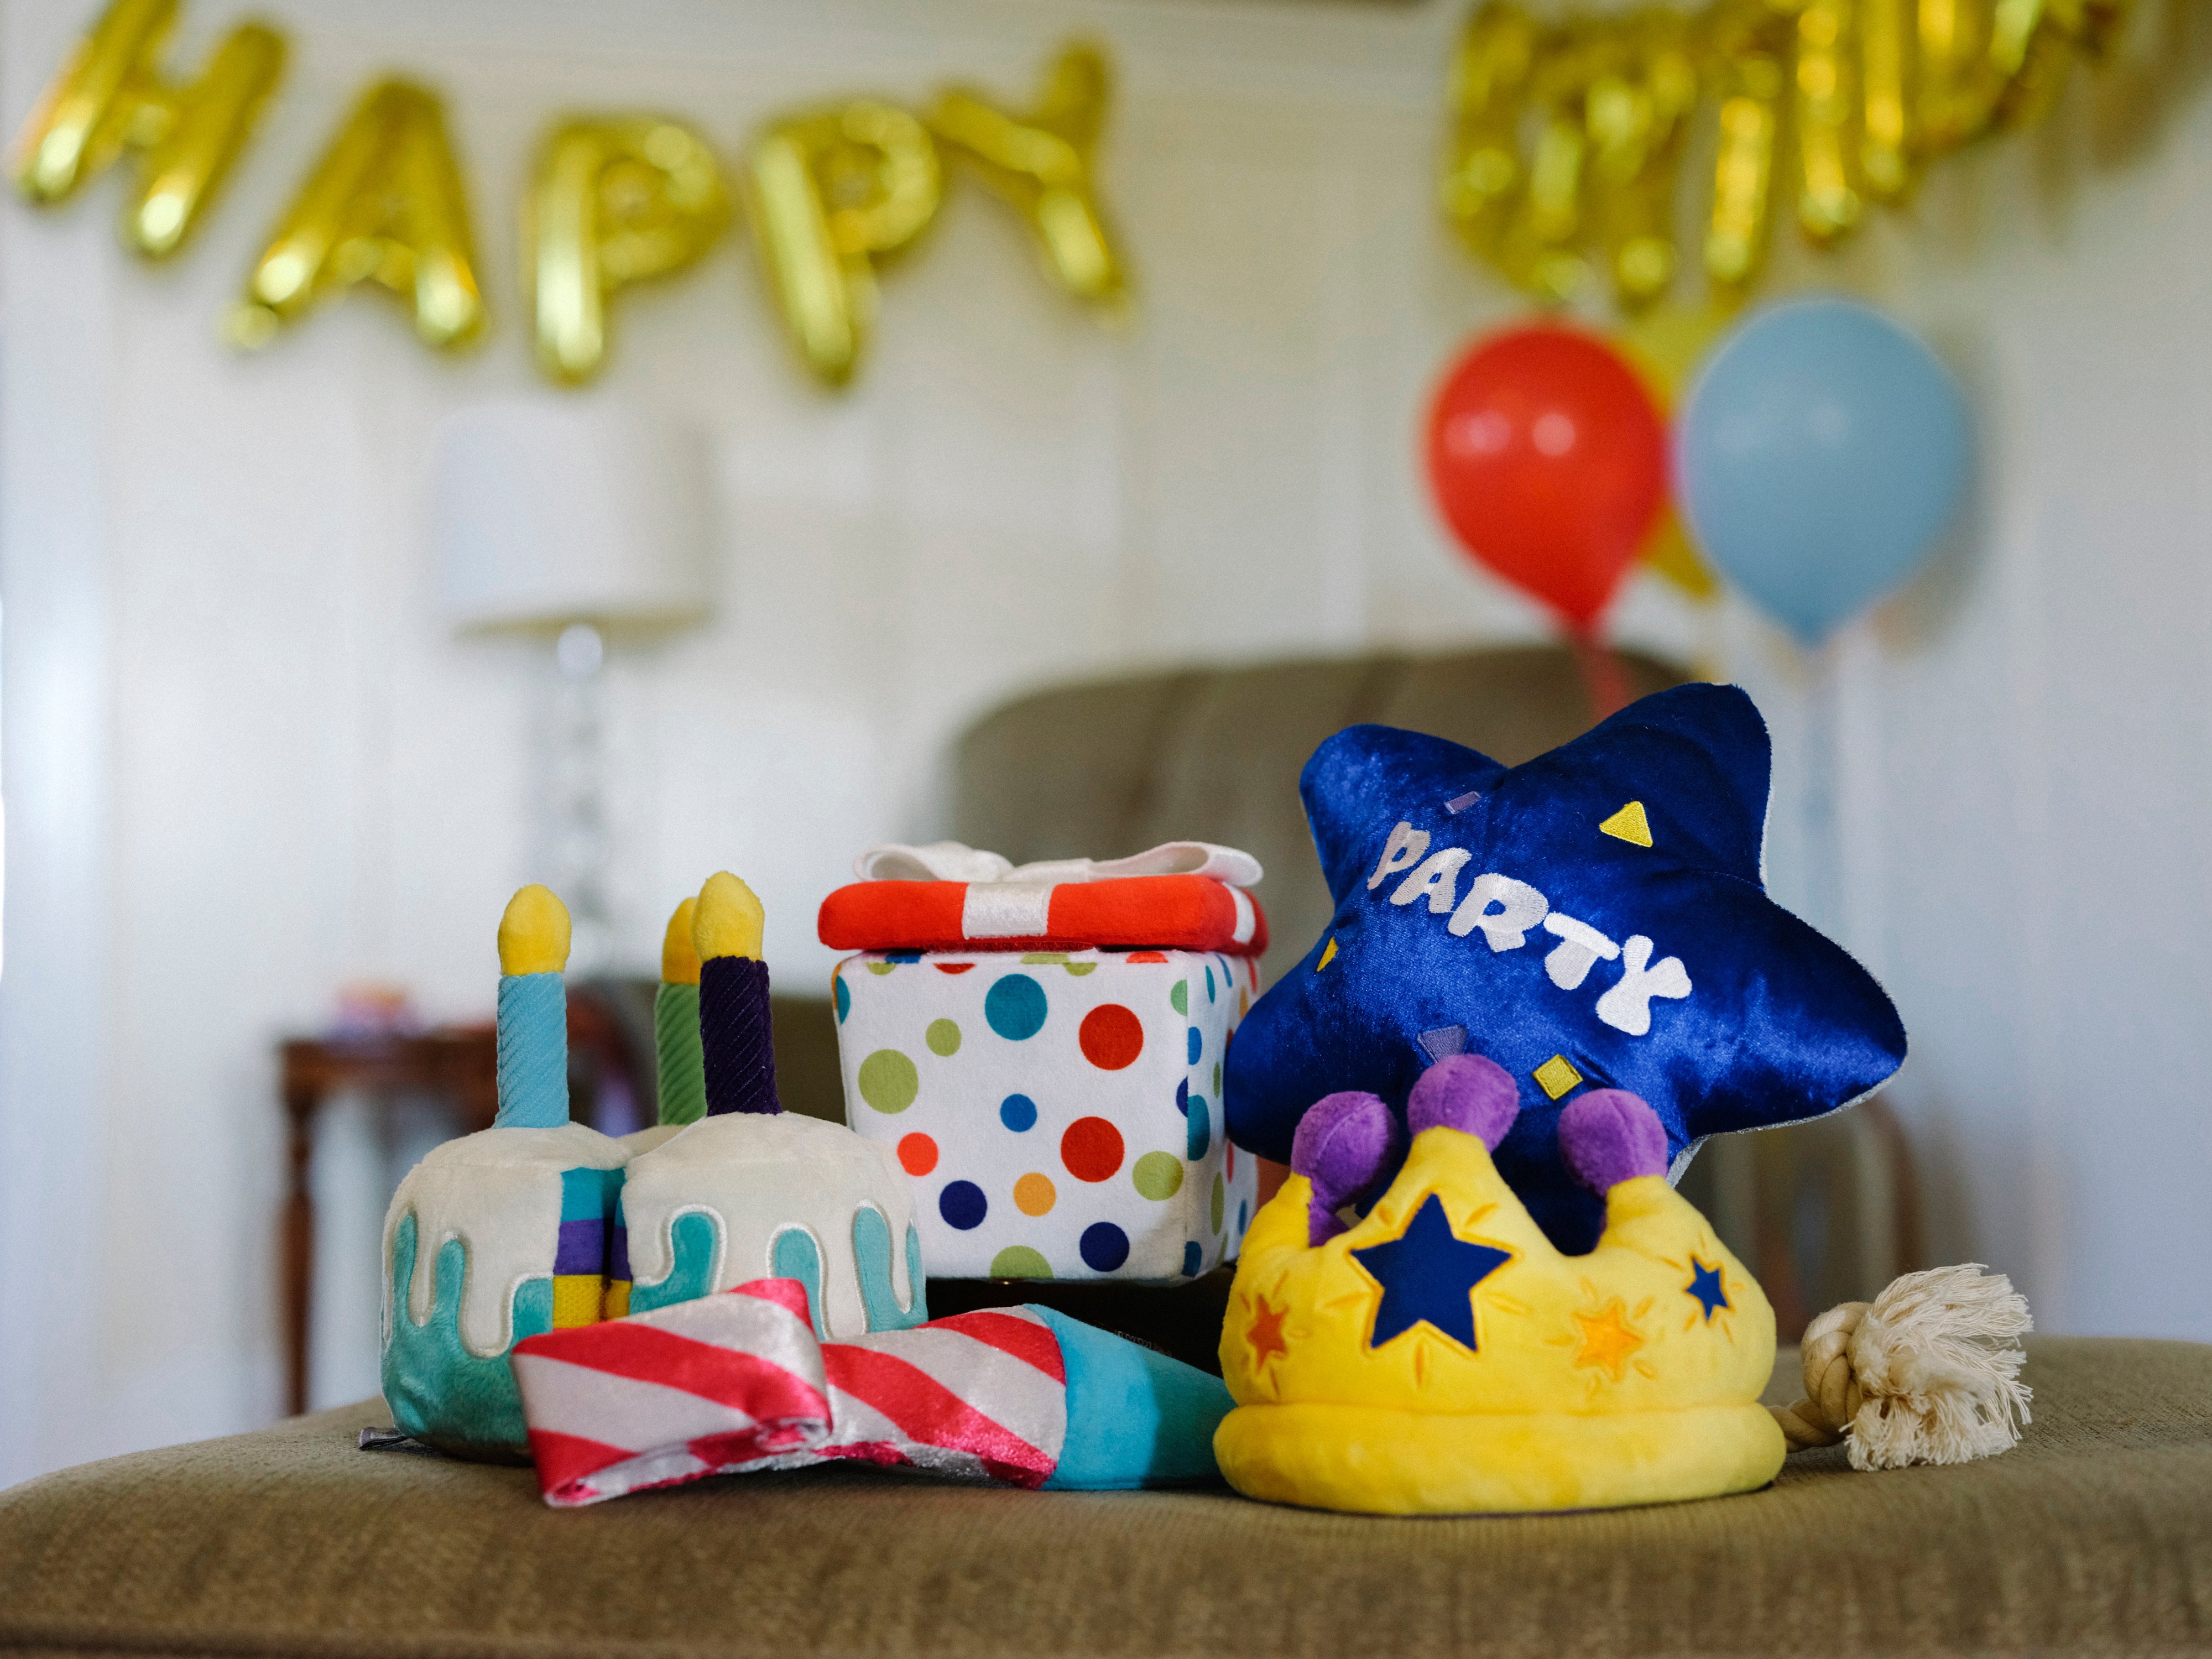 P.L.A.Y. Party Time Plush Dog toys, Best Day Ever Balloon